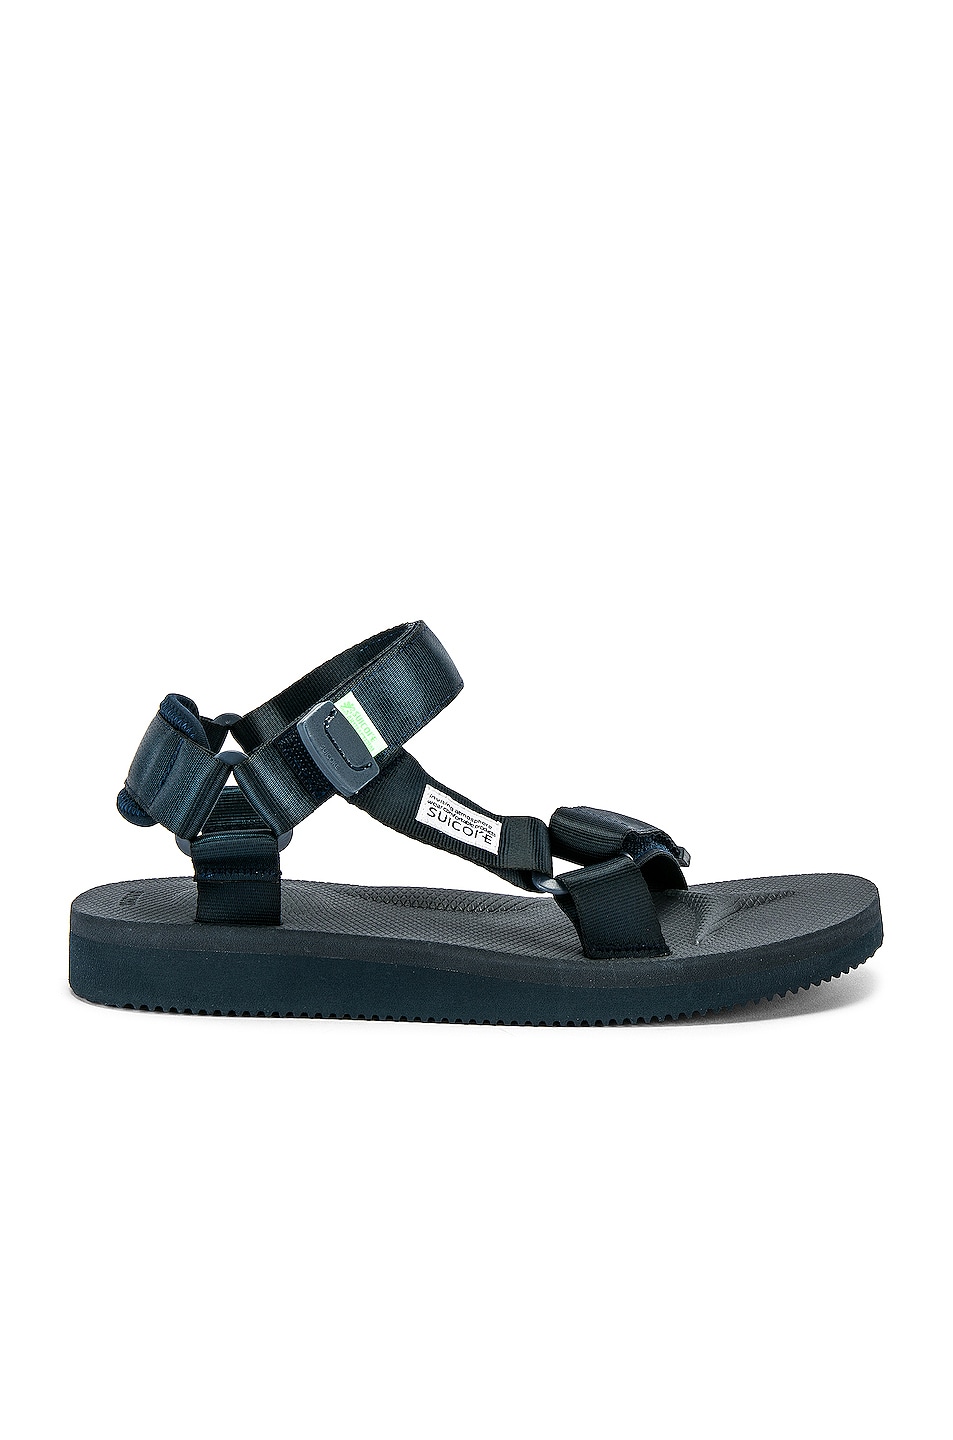 Image 1 of Suicoke DEPA Cab Sandals in Navy